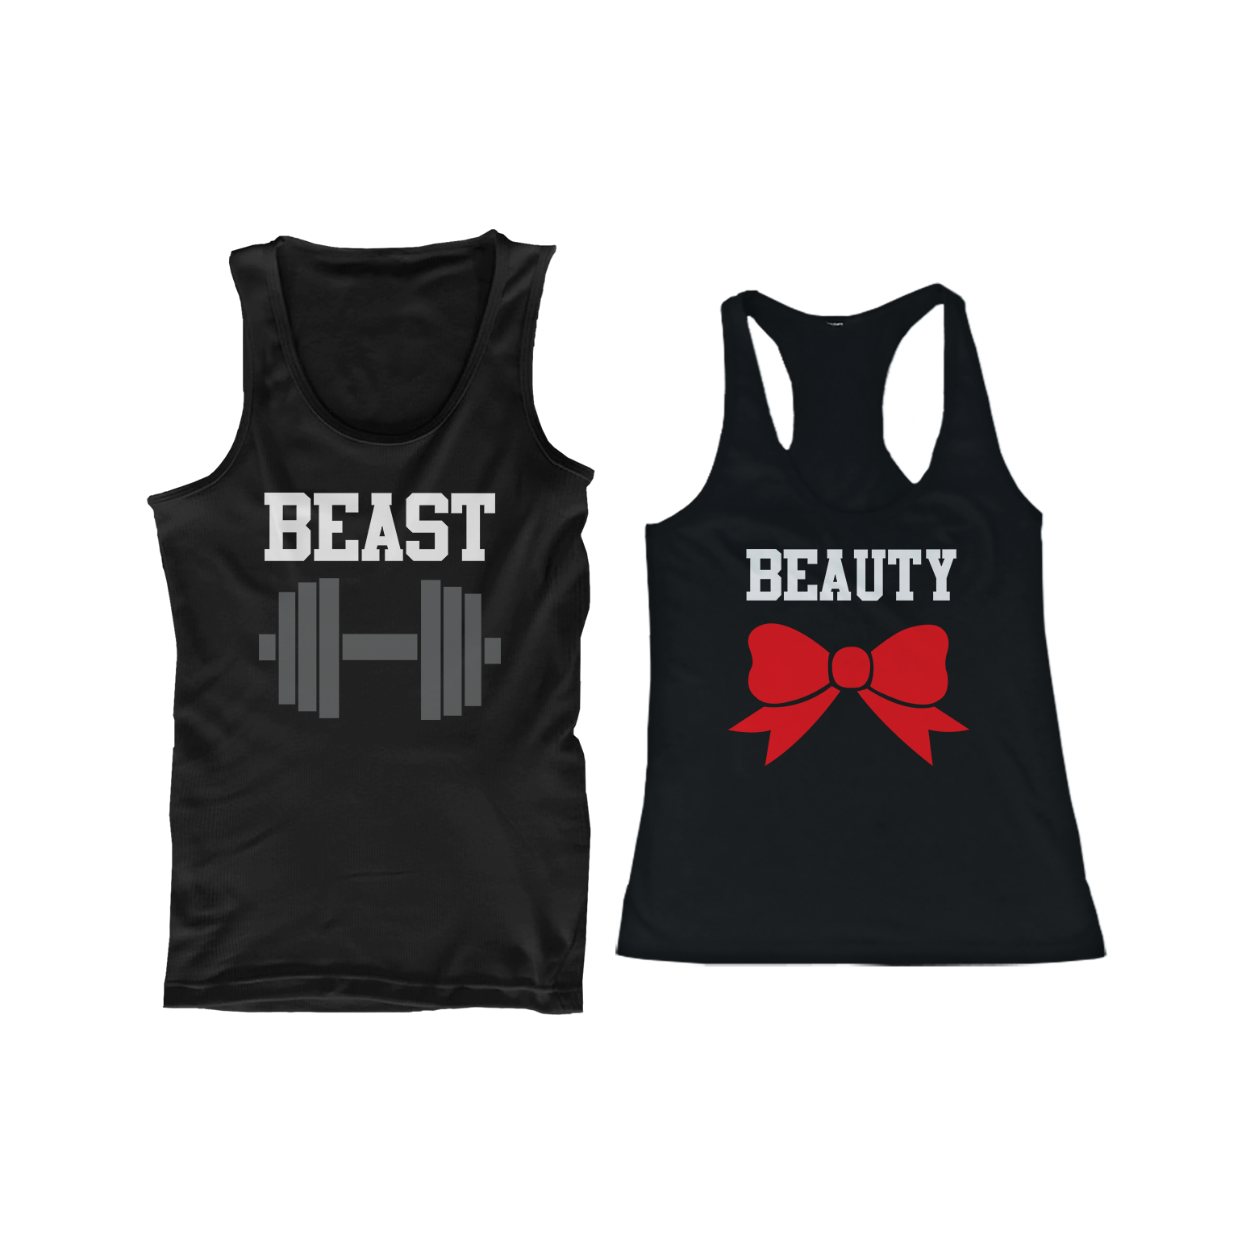 Workout Couple Shirts For Fitness And Gym